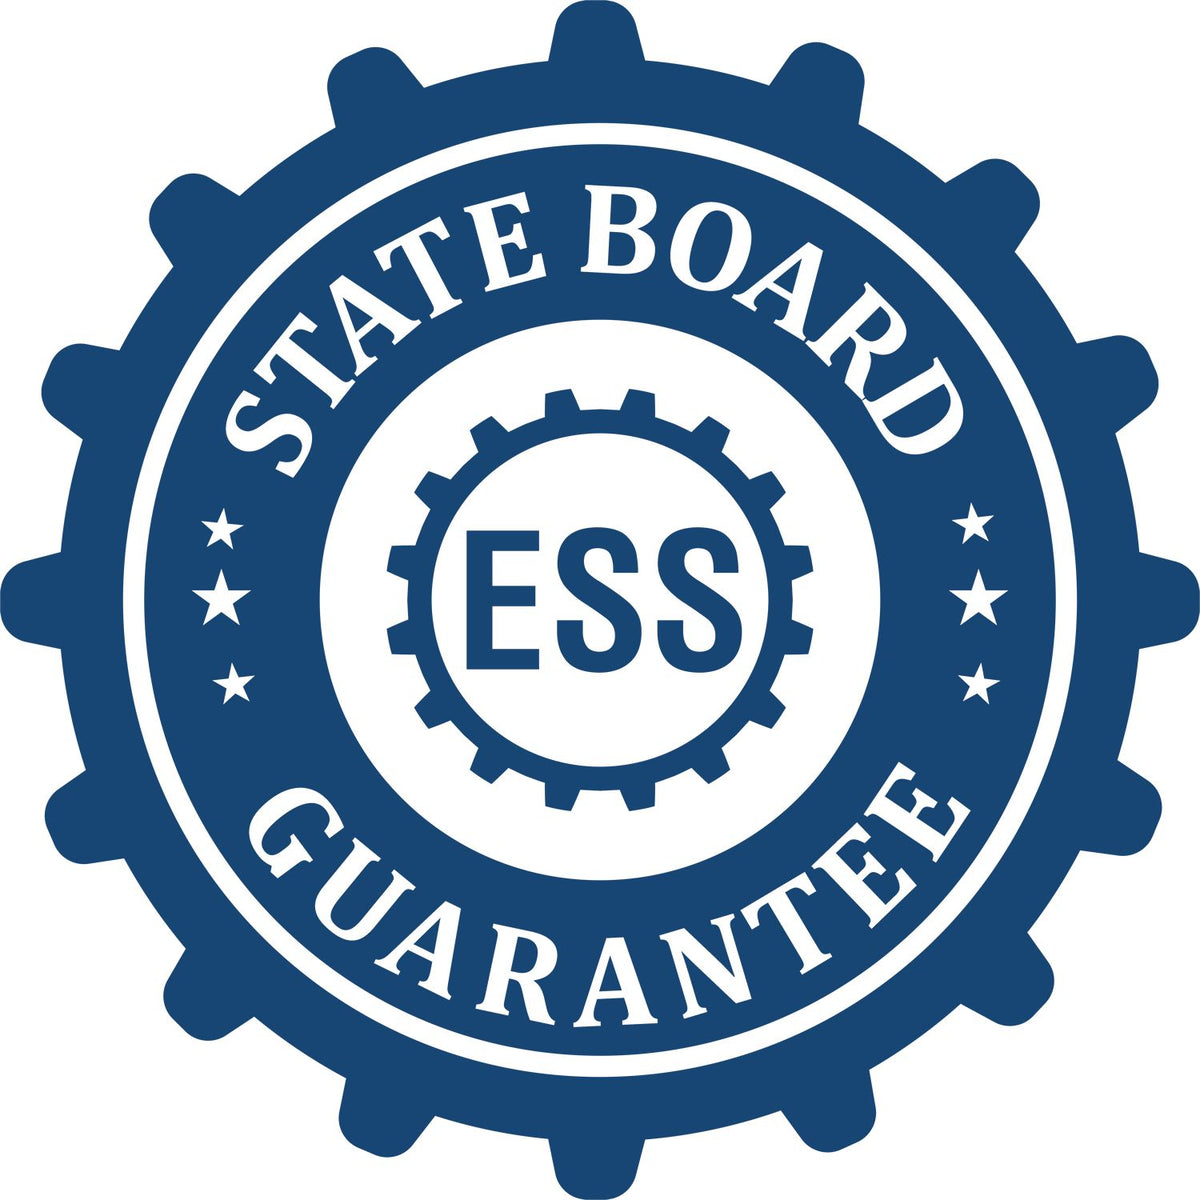 An emblem in a gear shape illustrating a state board guarantee for the Hybrid Colorado Geologist Seal